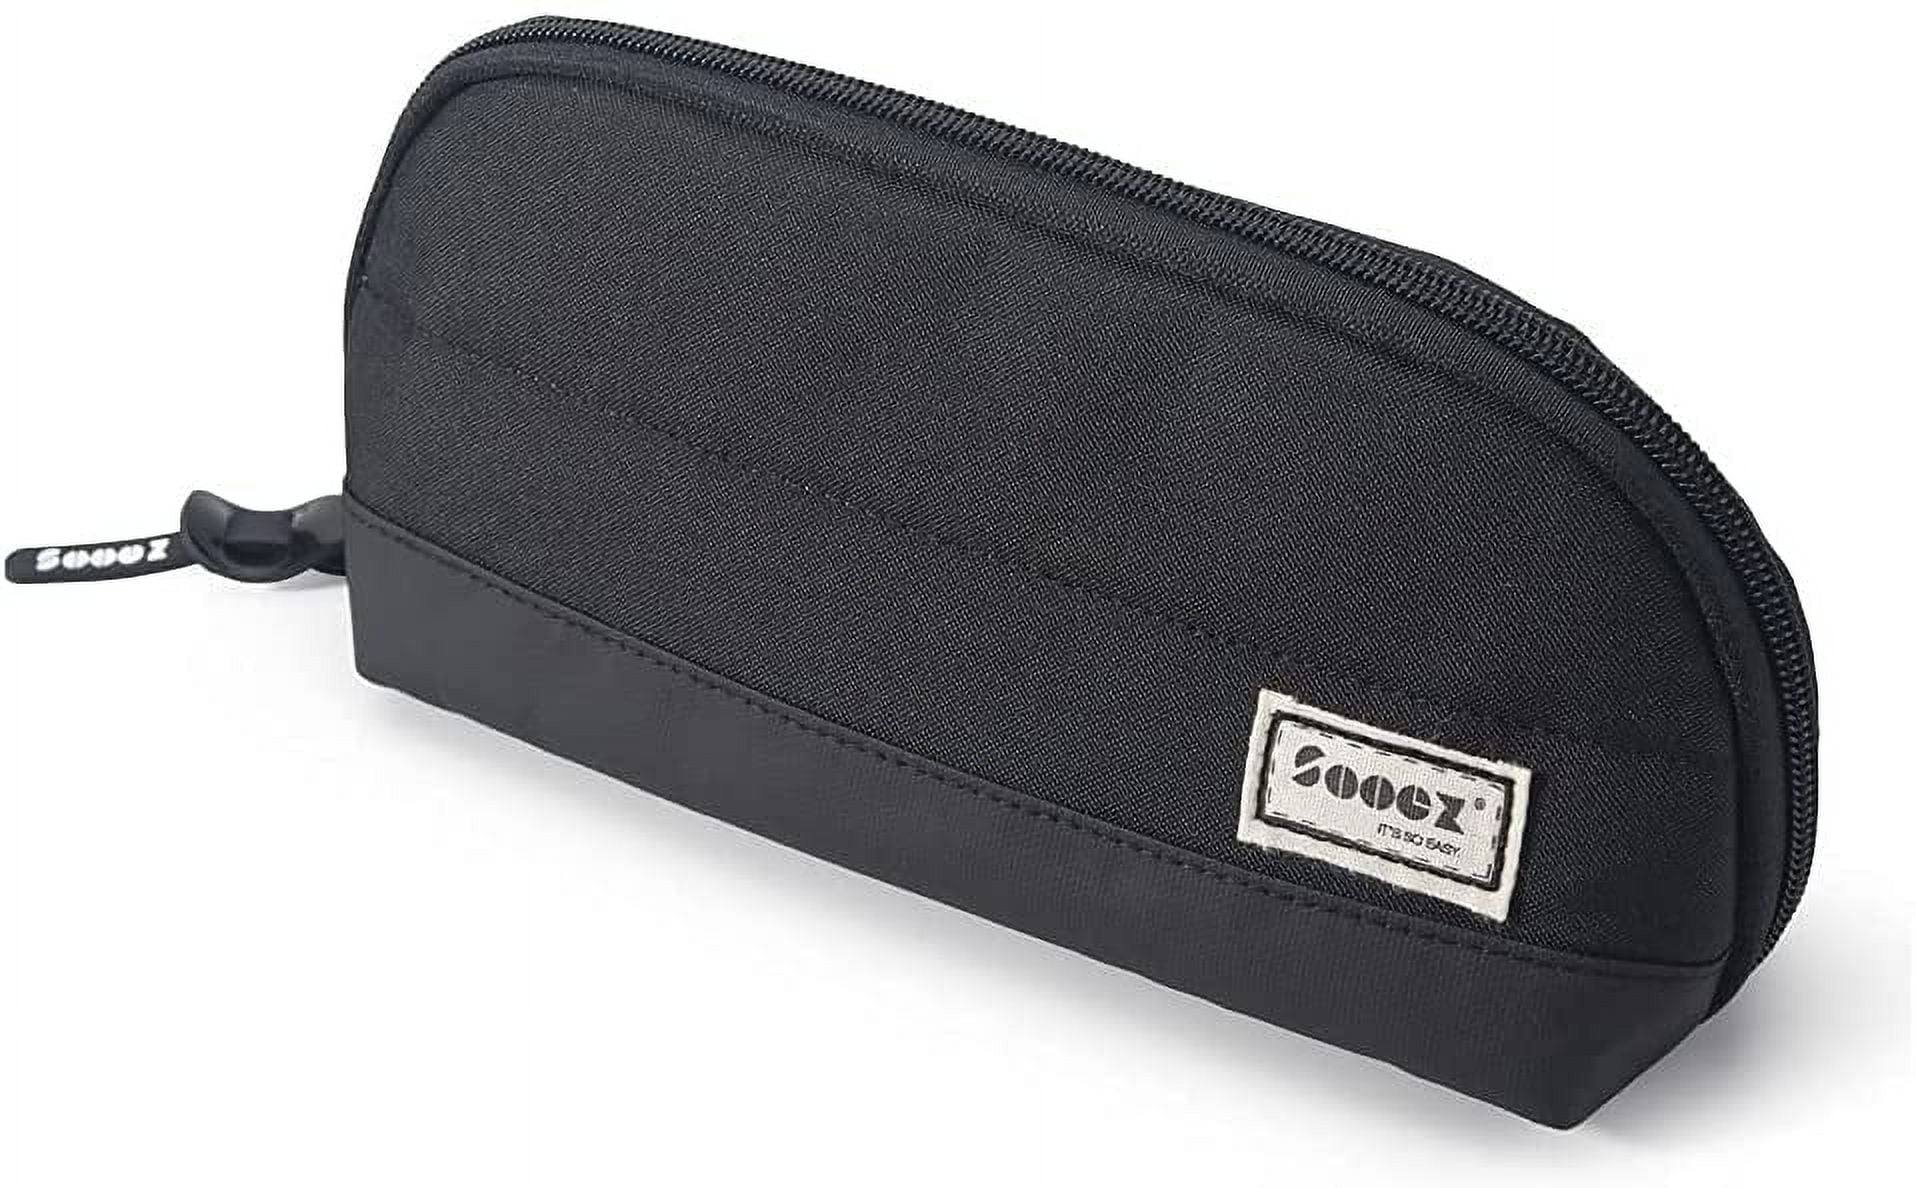 Sooez Wide-Opening Pencil Pen Case, Lightweight & Spacious Pencil Bag Pouch  Box Organizer, Aesthetic Supply With Triangular Design For Adults, Grey -  Imported Products from USA - iBhejo